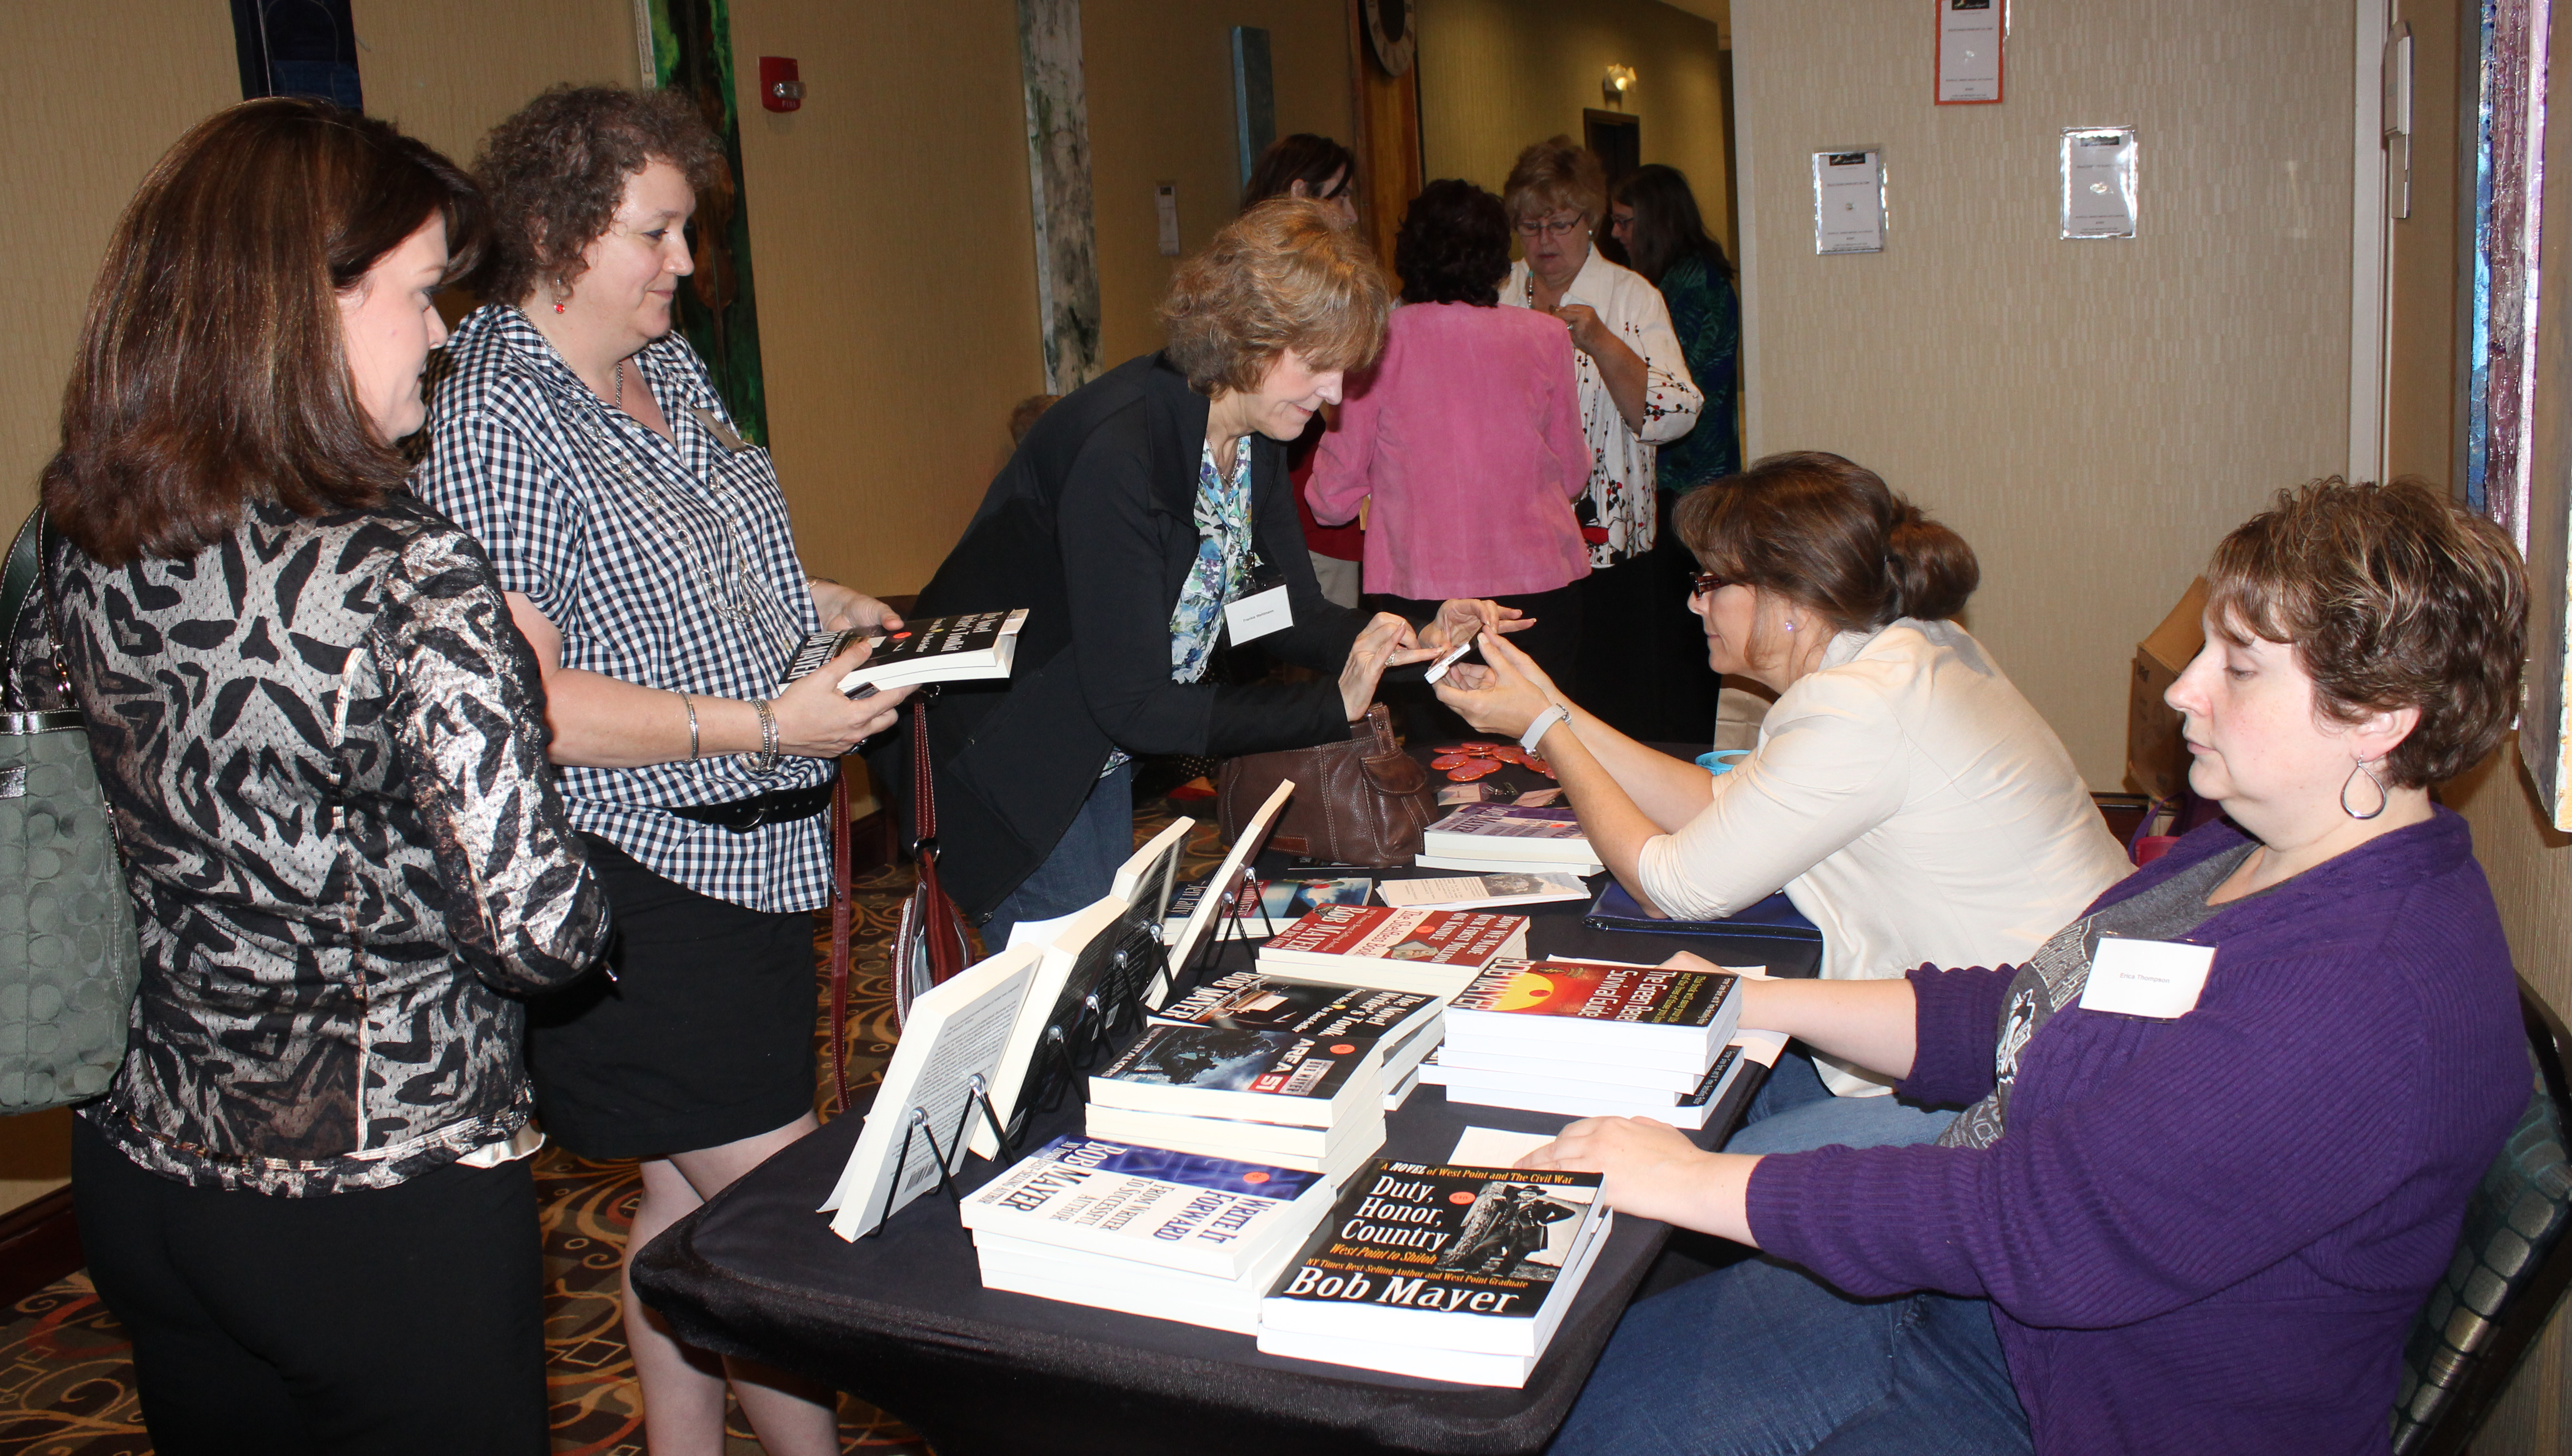 RWA members register for the annual Lonestar Writer's Conference at the check-in table.